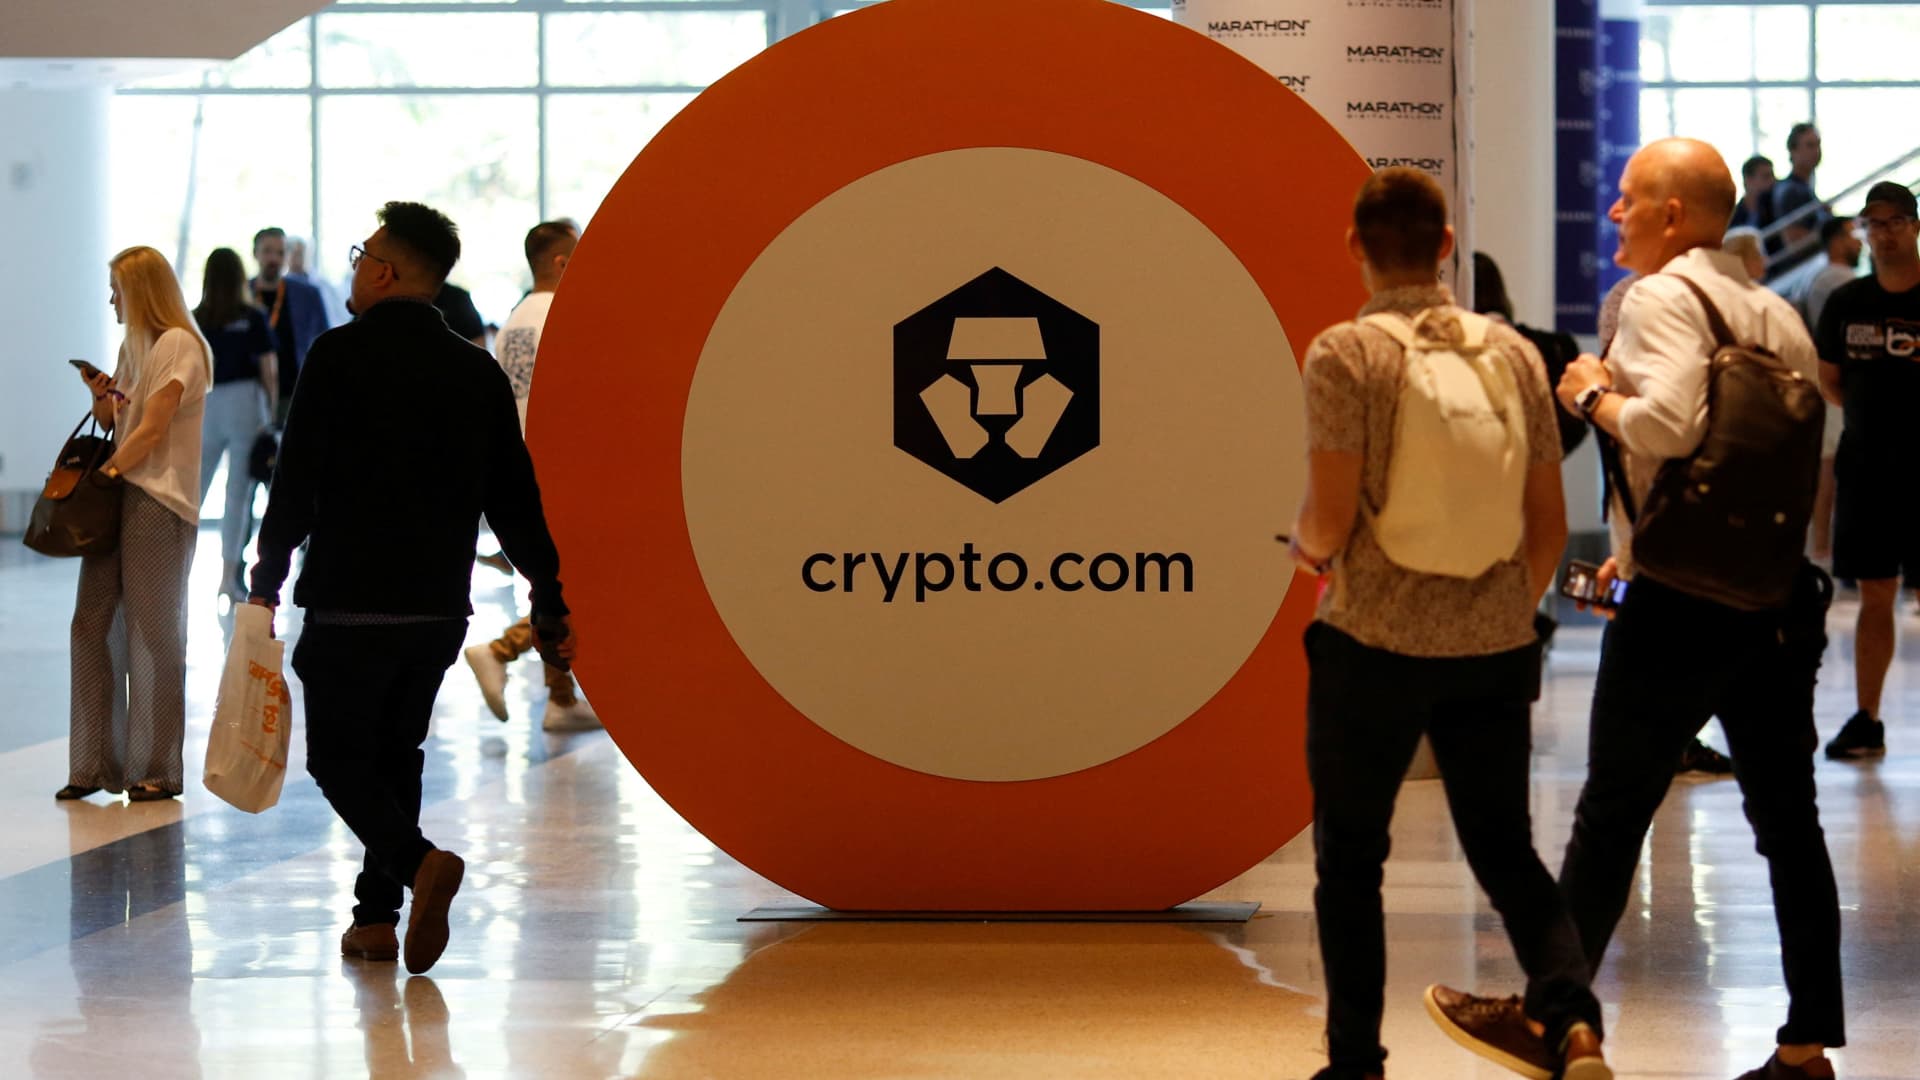 Crypto.com customers worry it could follow FTX, as CEO tries to reassure them everything's fine